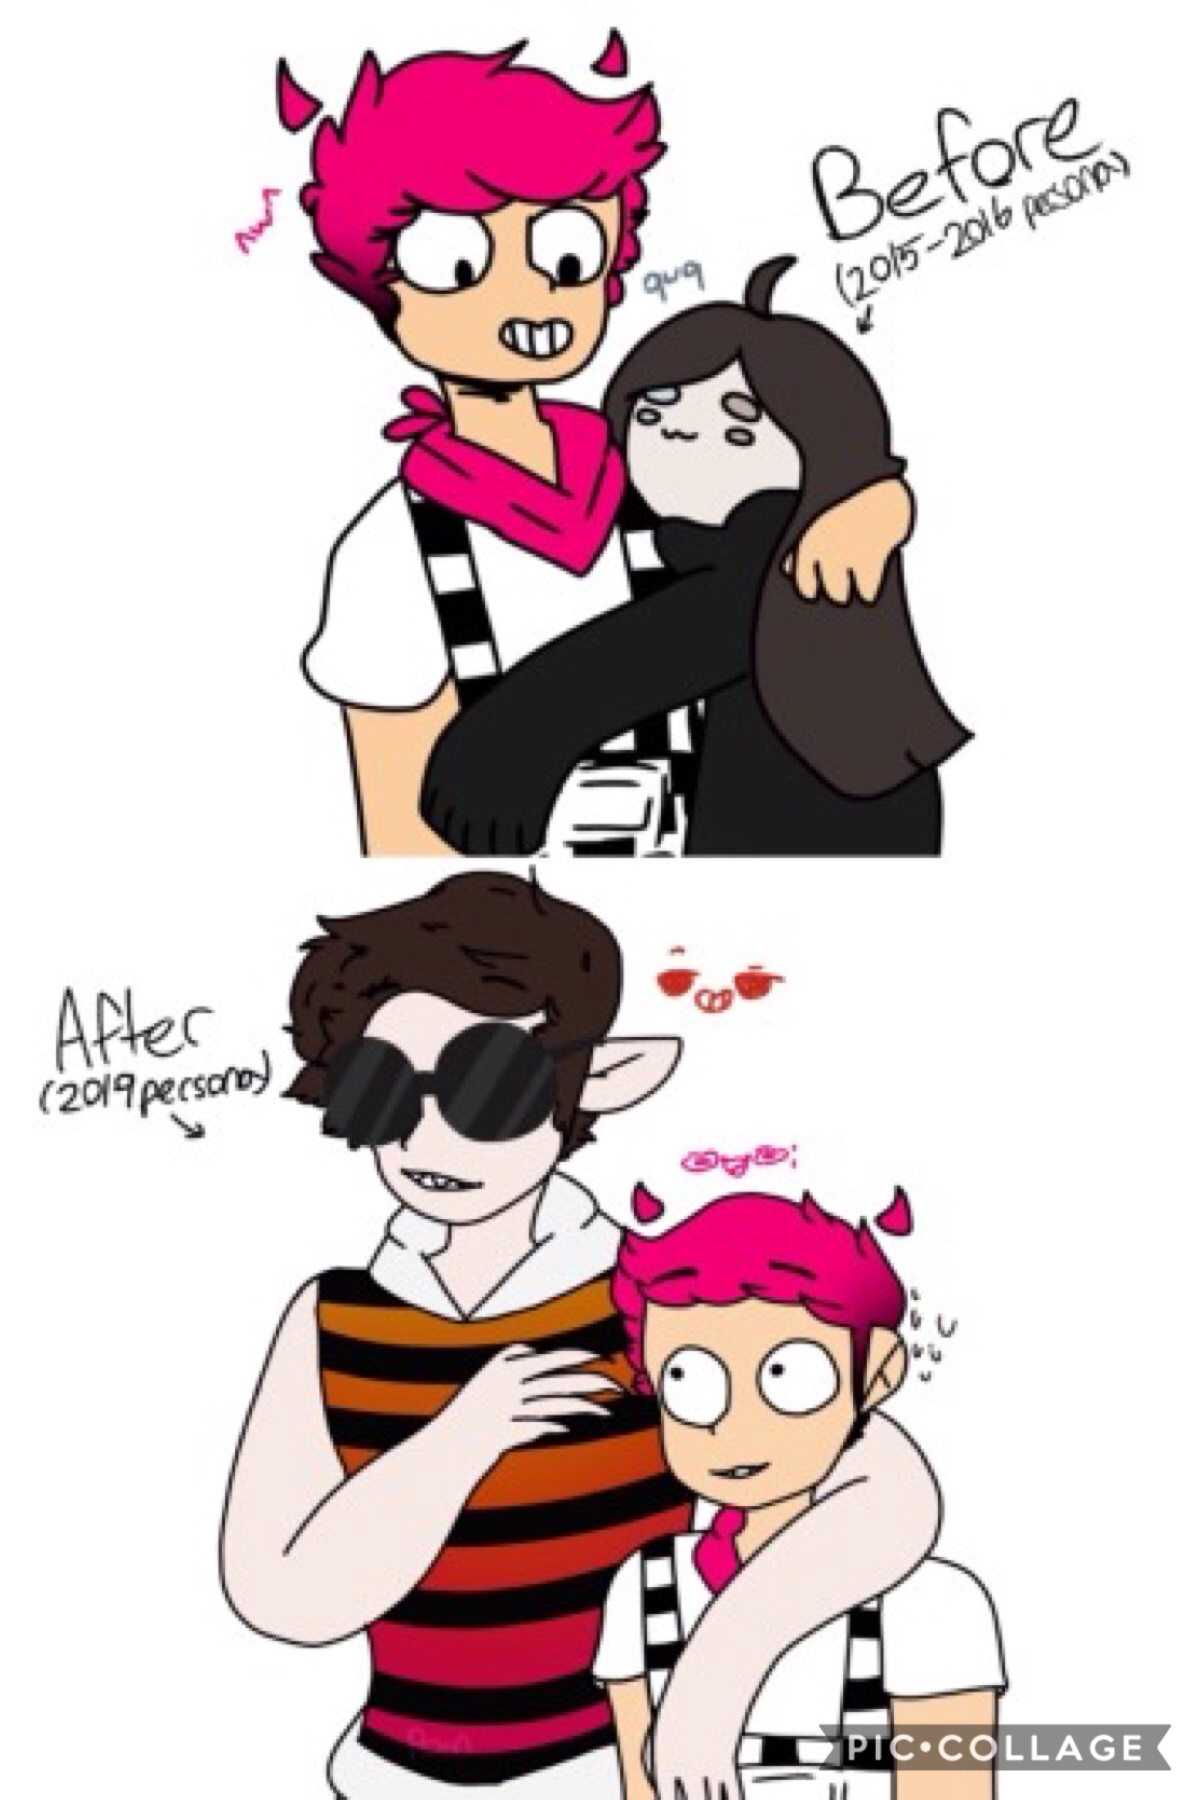 God I love this it's so cute she's @weekdayblues (I believe) on here but she's bee-beast on Tumblr she drew this!!! (I'm so sorry if I used the wrong pronouns) 